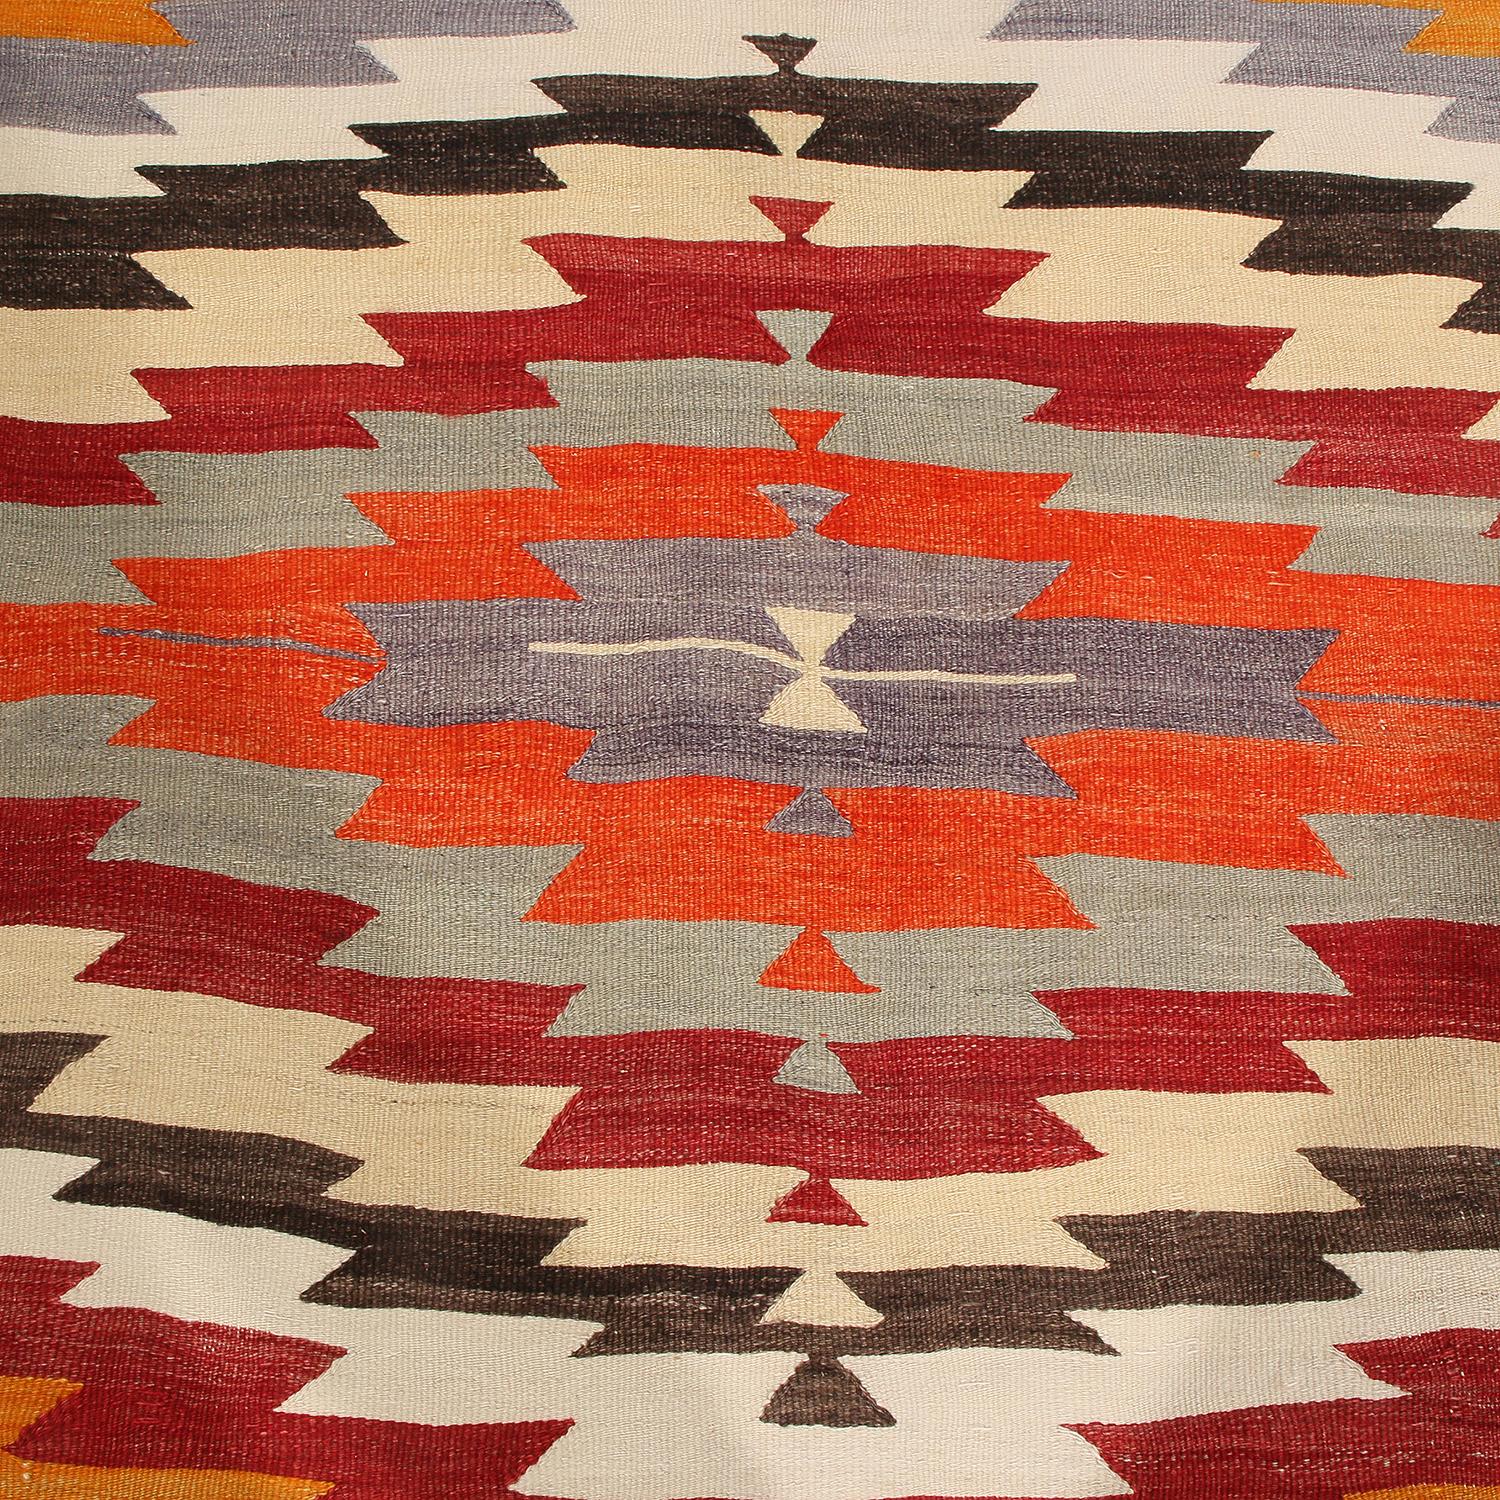 Flat-woven by hand in high-quality wool originating from Turkey between 1940-1950, this vintage geometric Kilim rug has a visually grasping array of unique colorways, enjoying a subtle emphasis of its multi-tonal blue colorways with accenting hues